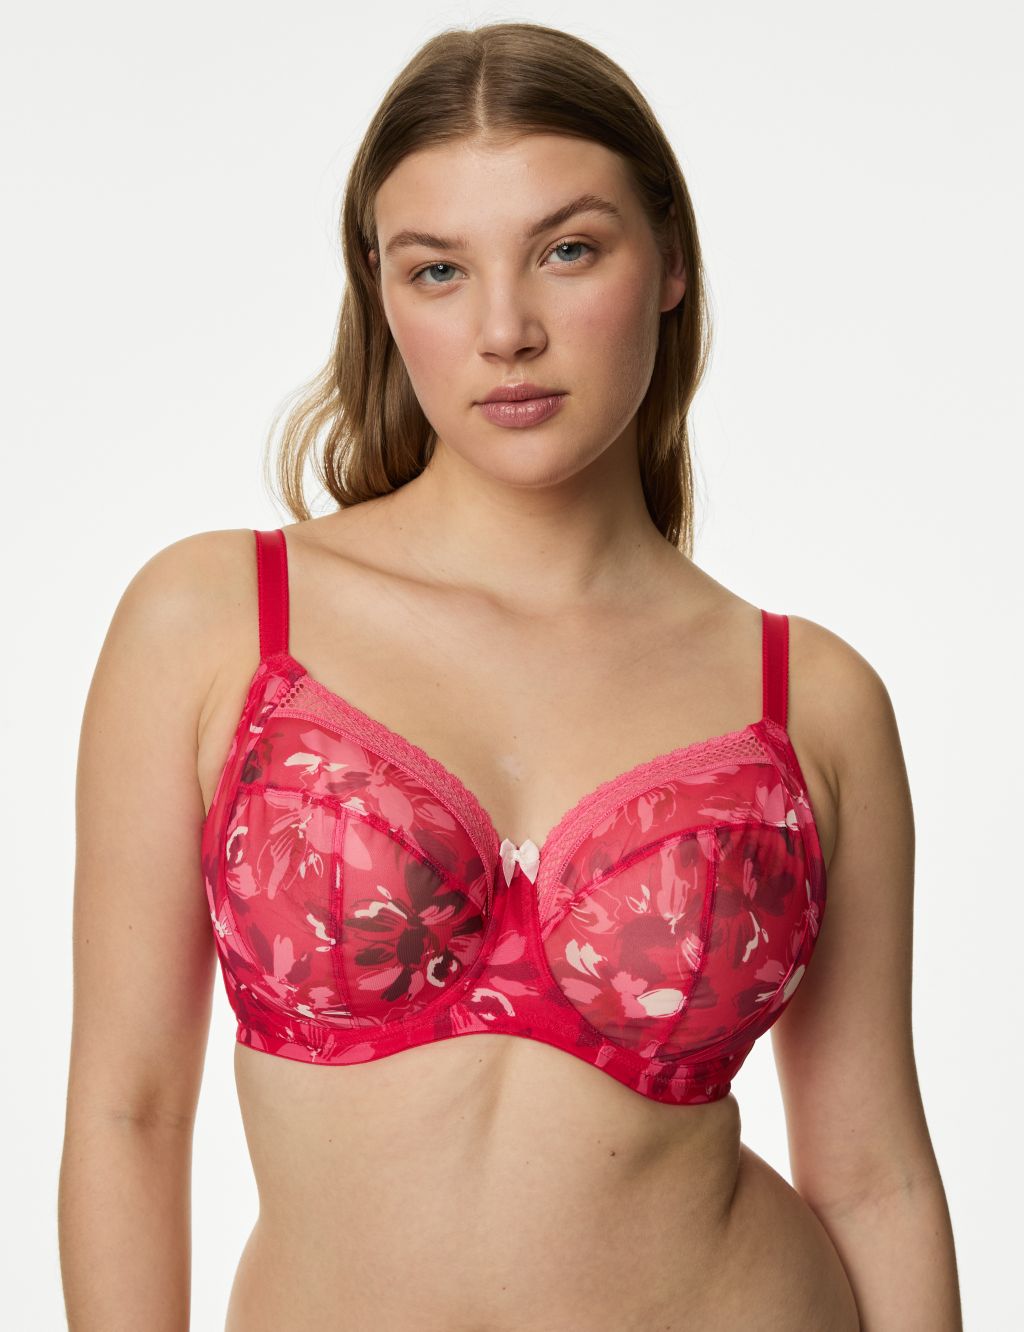 Extra Support Bras